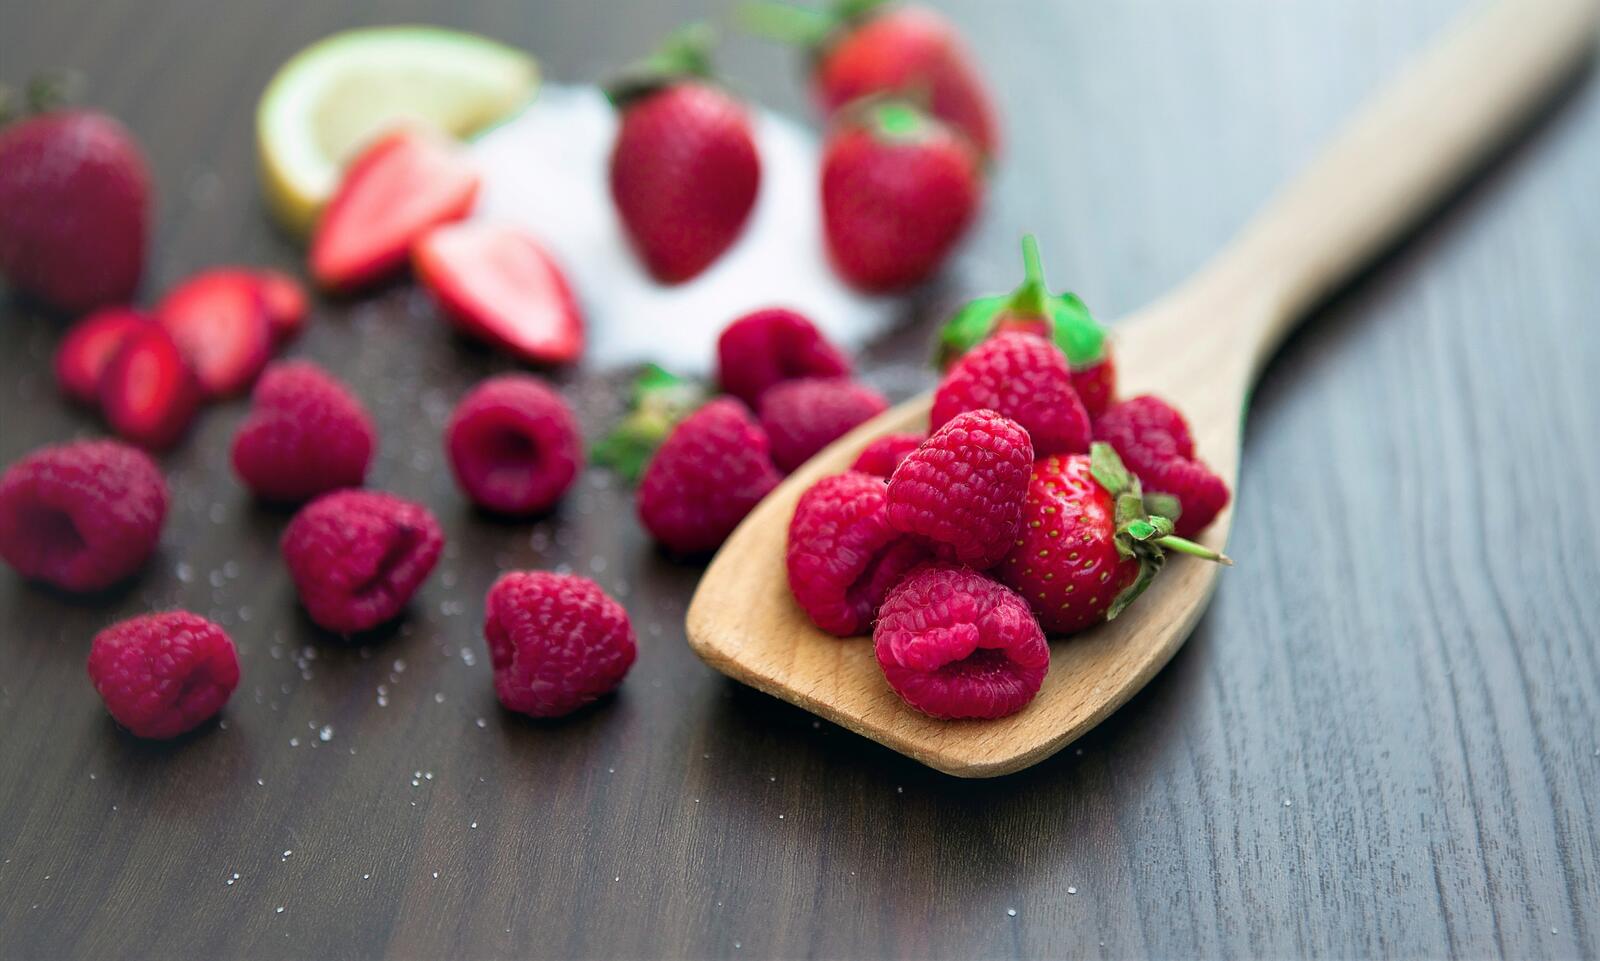 Wallpapers raspberry strawberry fruits on the desktop